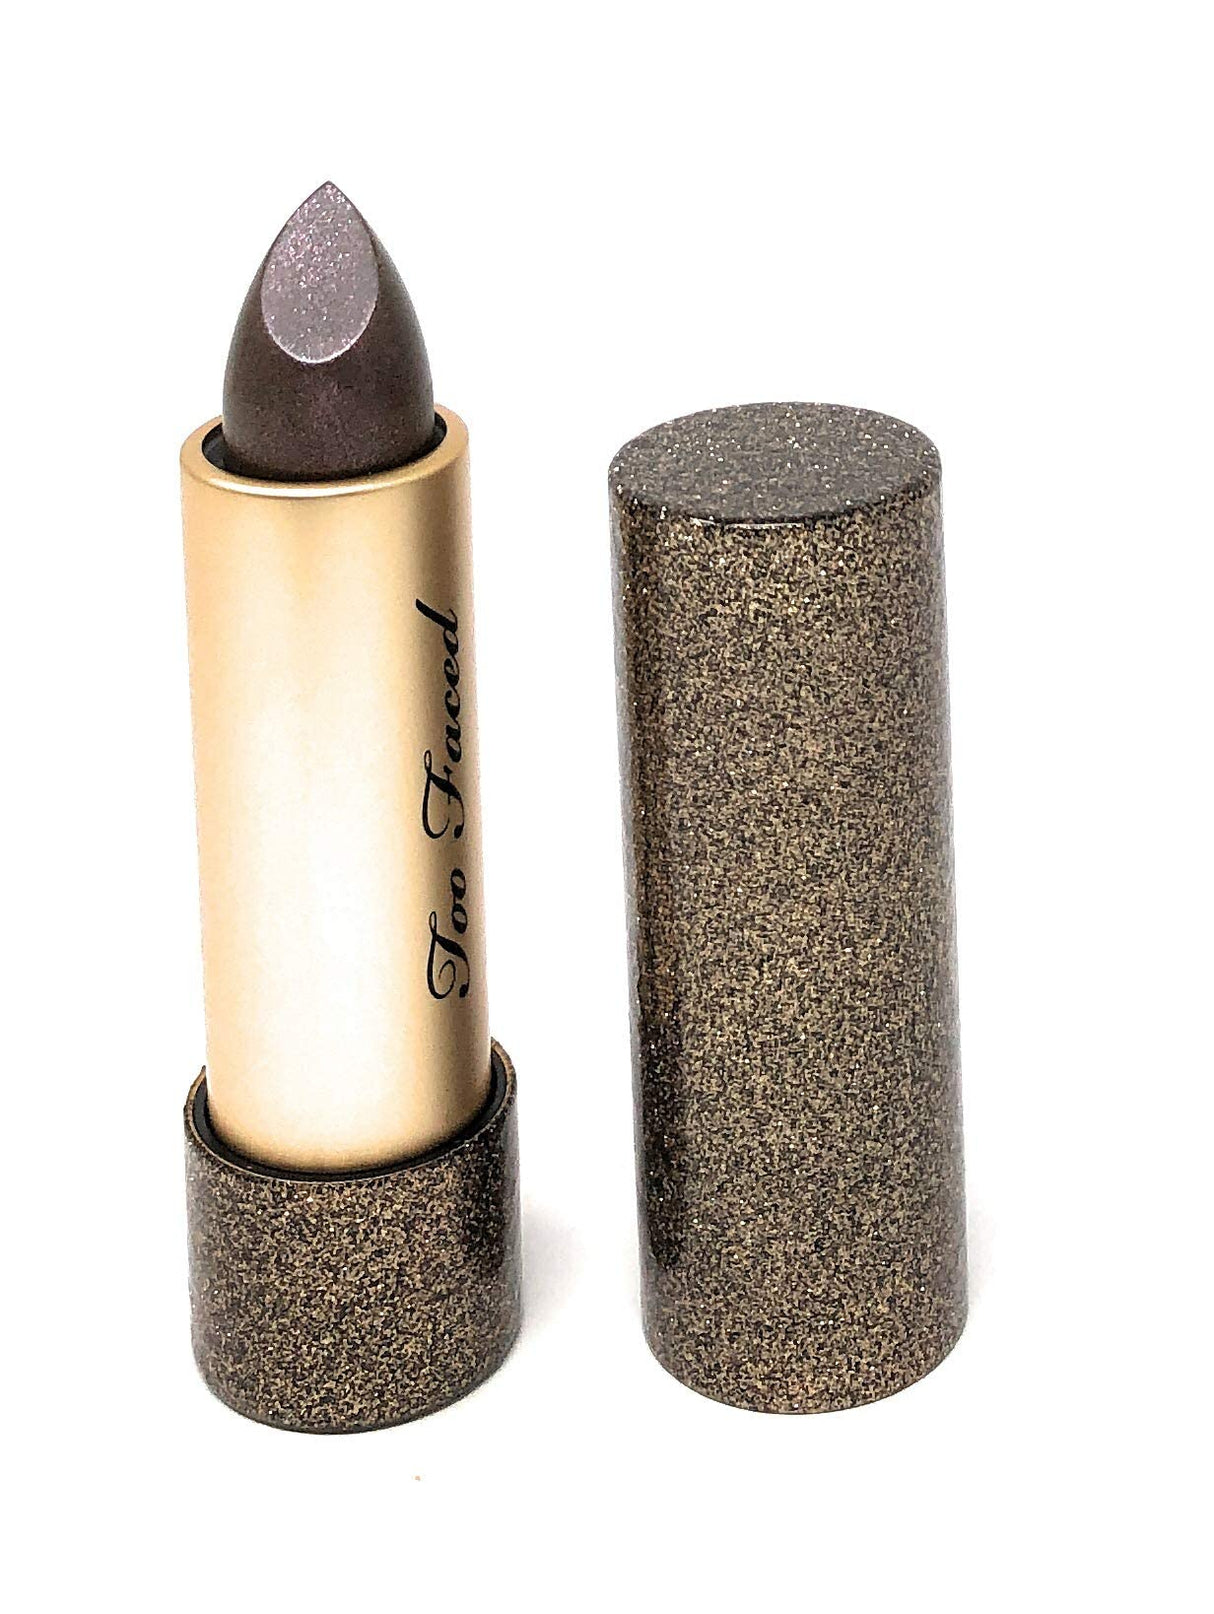 Too Faced Throwback Lipstick Metallic Sparkle Lipstick - Cheers to 20 Years Collection - Hoochie